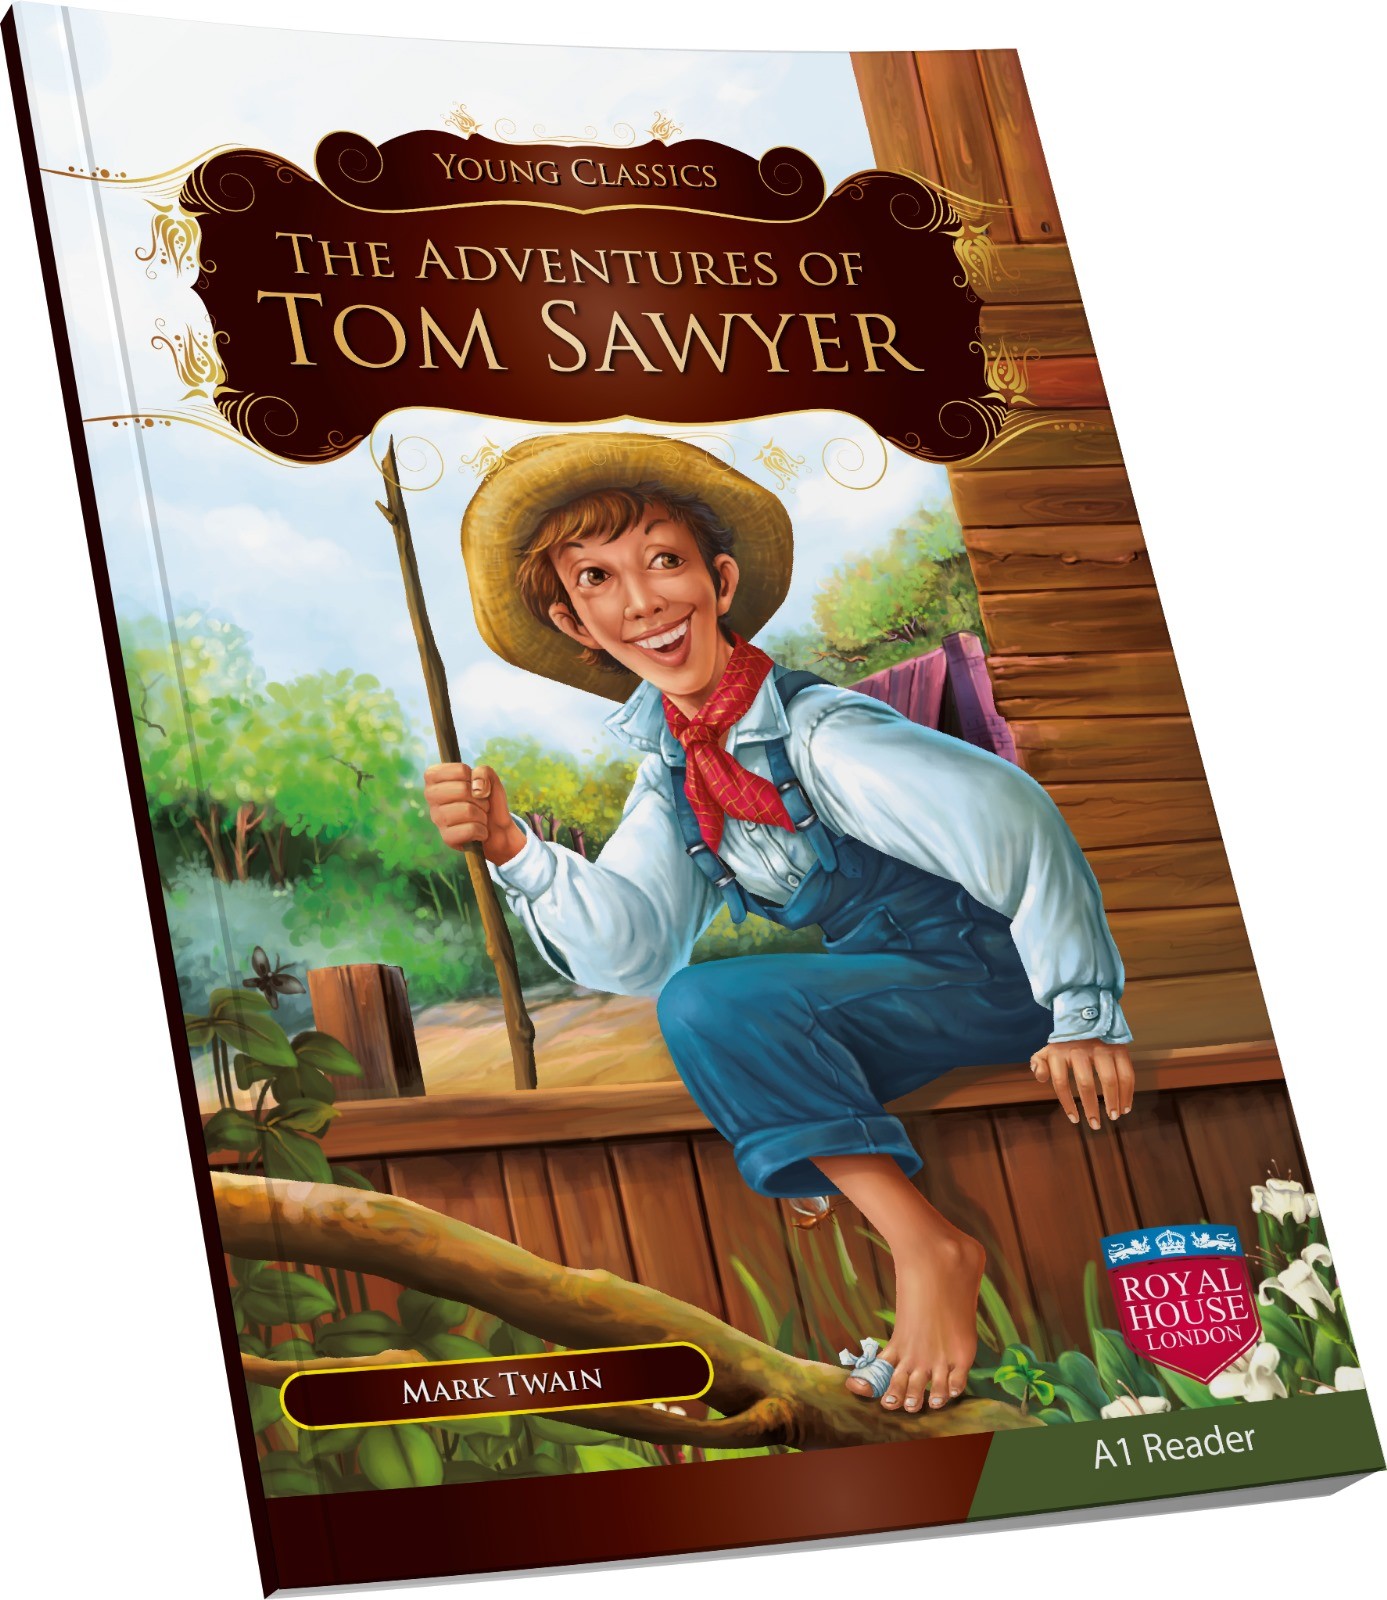 THE ADVENTURES OF TOM SAWYER A1 Reader